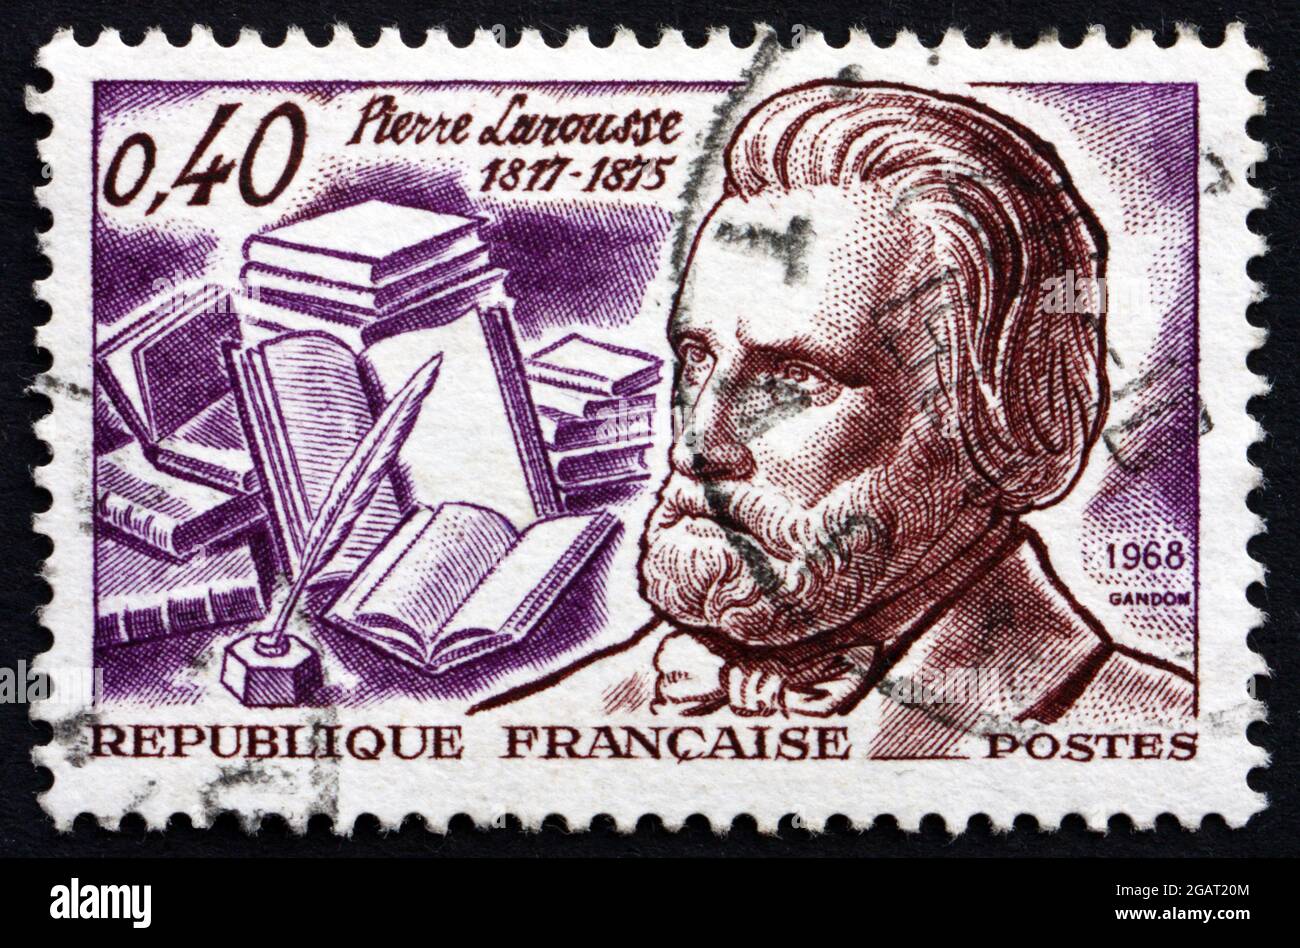 FRANCE - CIRCA 1968: a stamp printed in the France shows Pierre Larousse, Grammarian, Lexicographer and Encyclopedist, circa 1968 Stock Photo